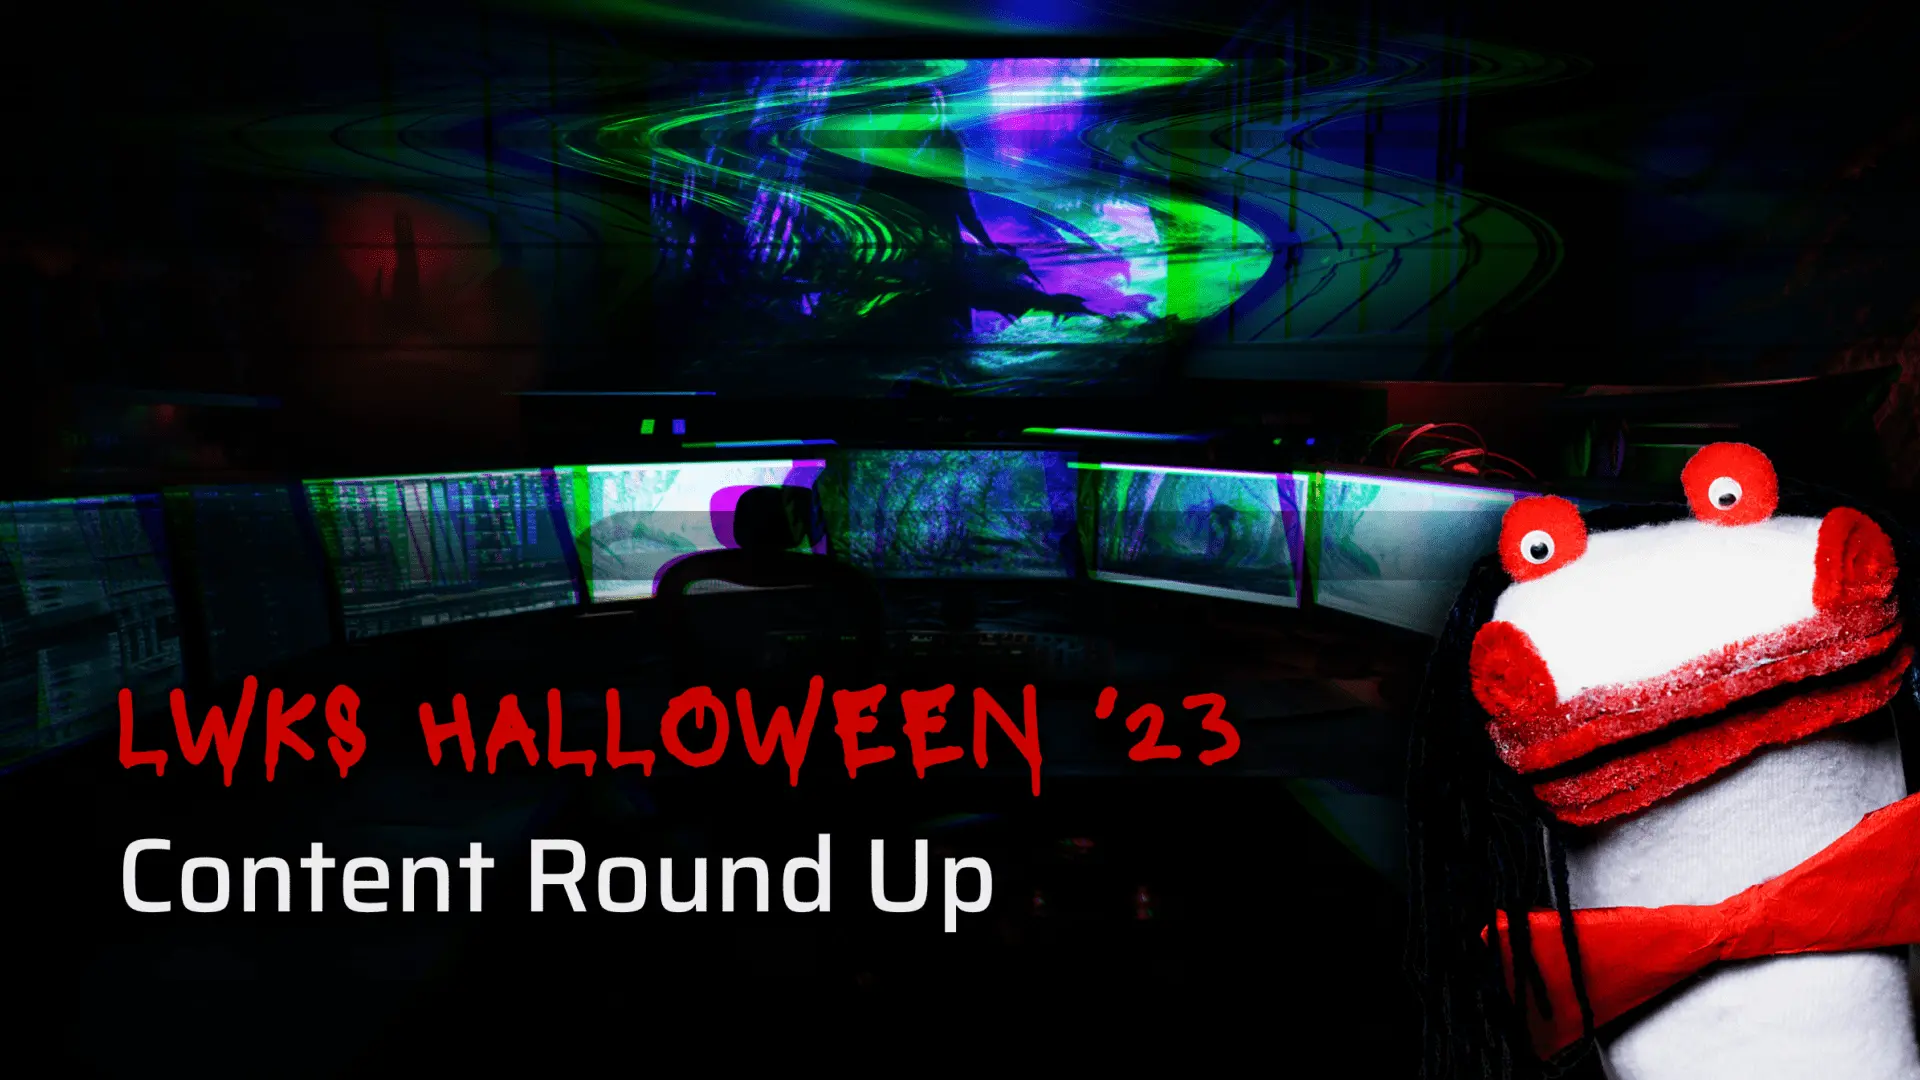 The Lightworks Halloween '23 Content Round Up